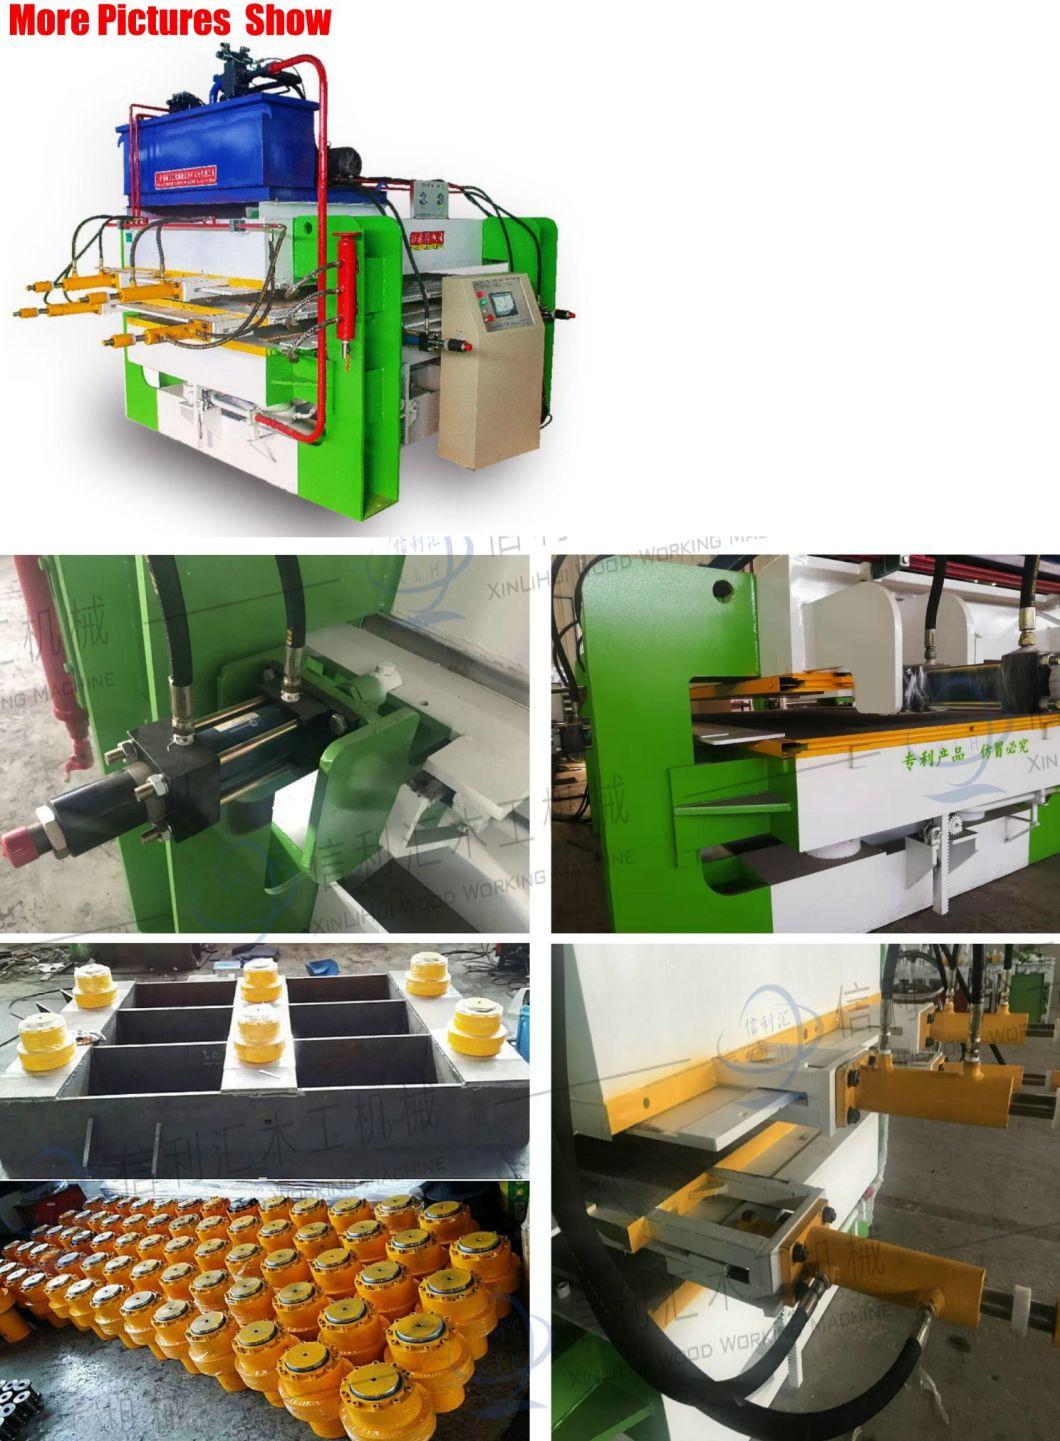 Qingdao Xinlihui Joinery Board Hot Press Can Be Adjusted Wide Side Oil Cylinder Double-Layer Four-Side Side Press Platter